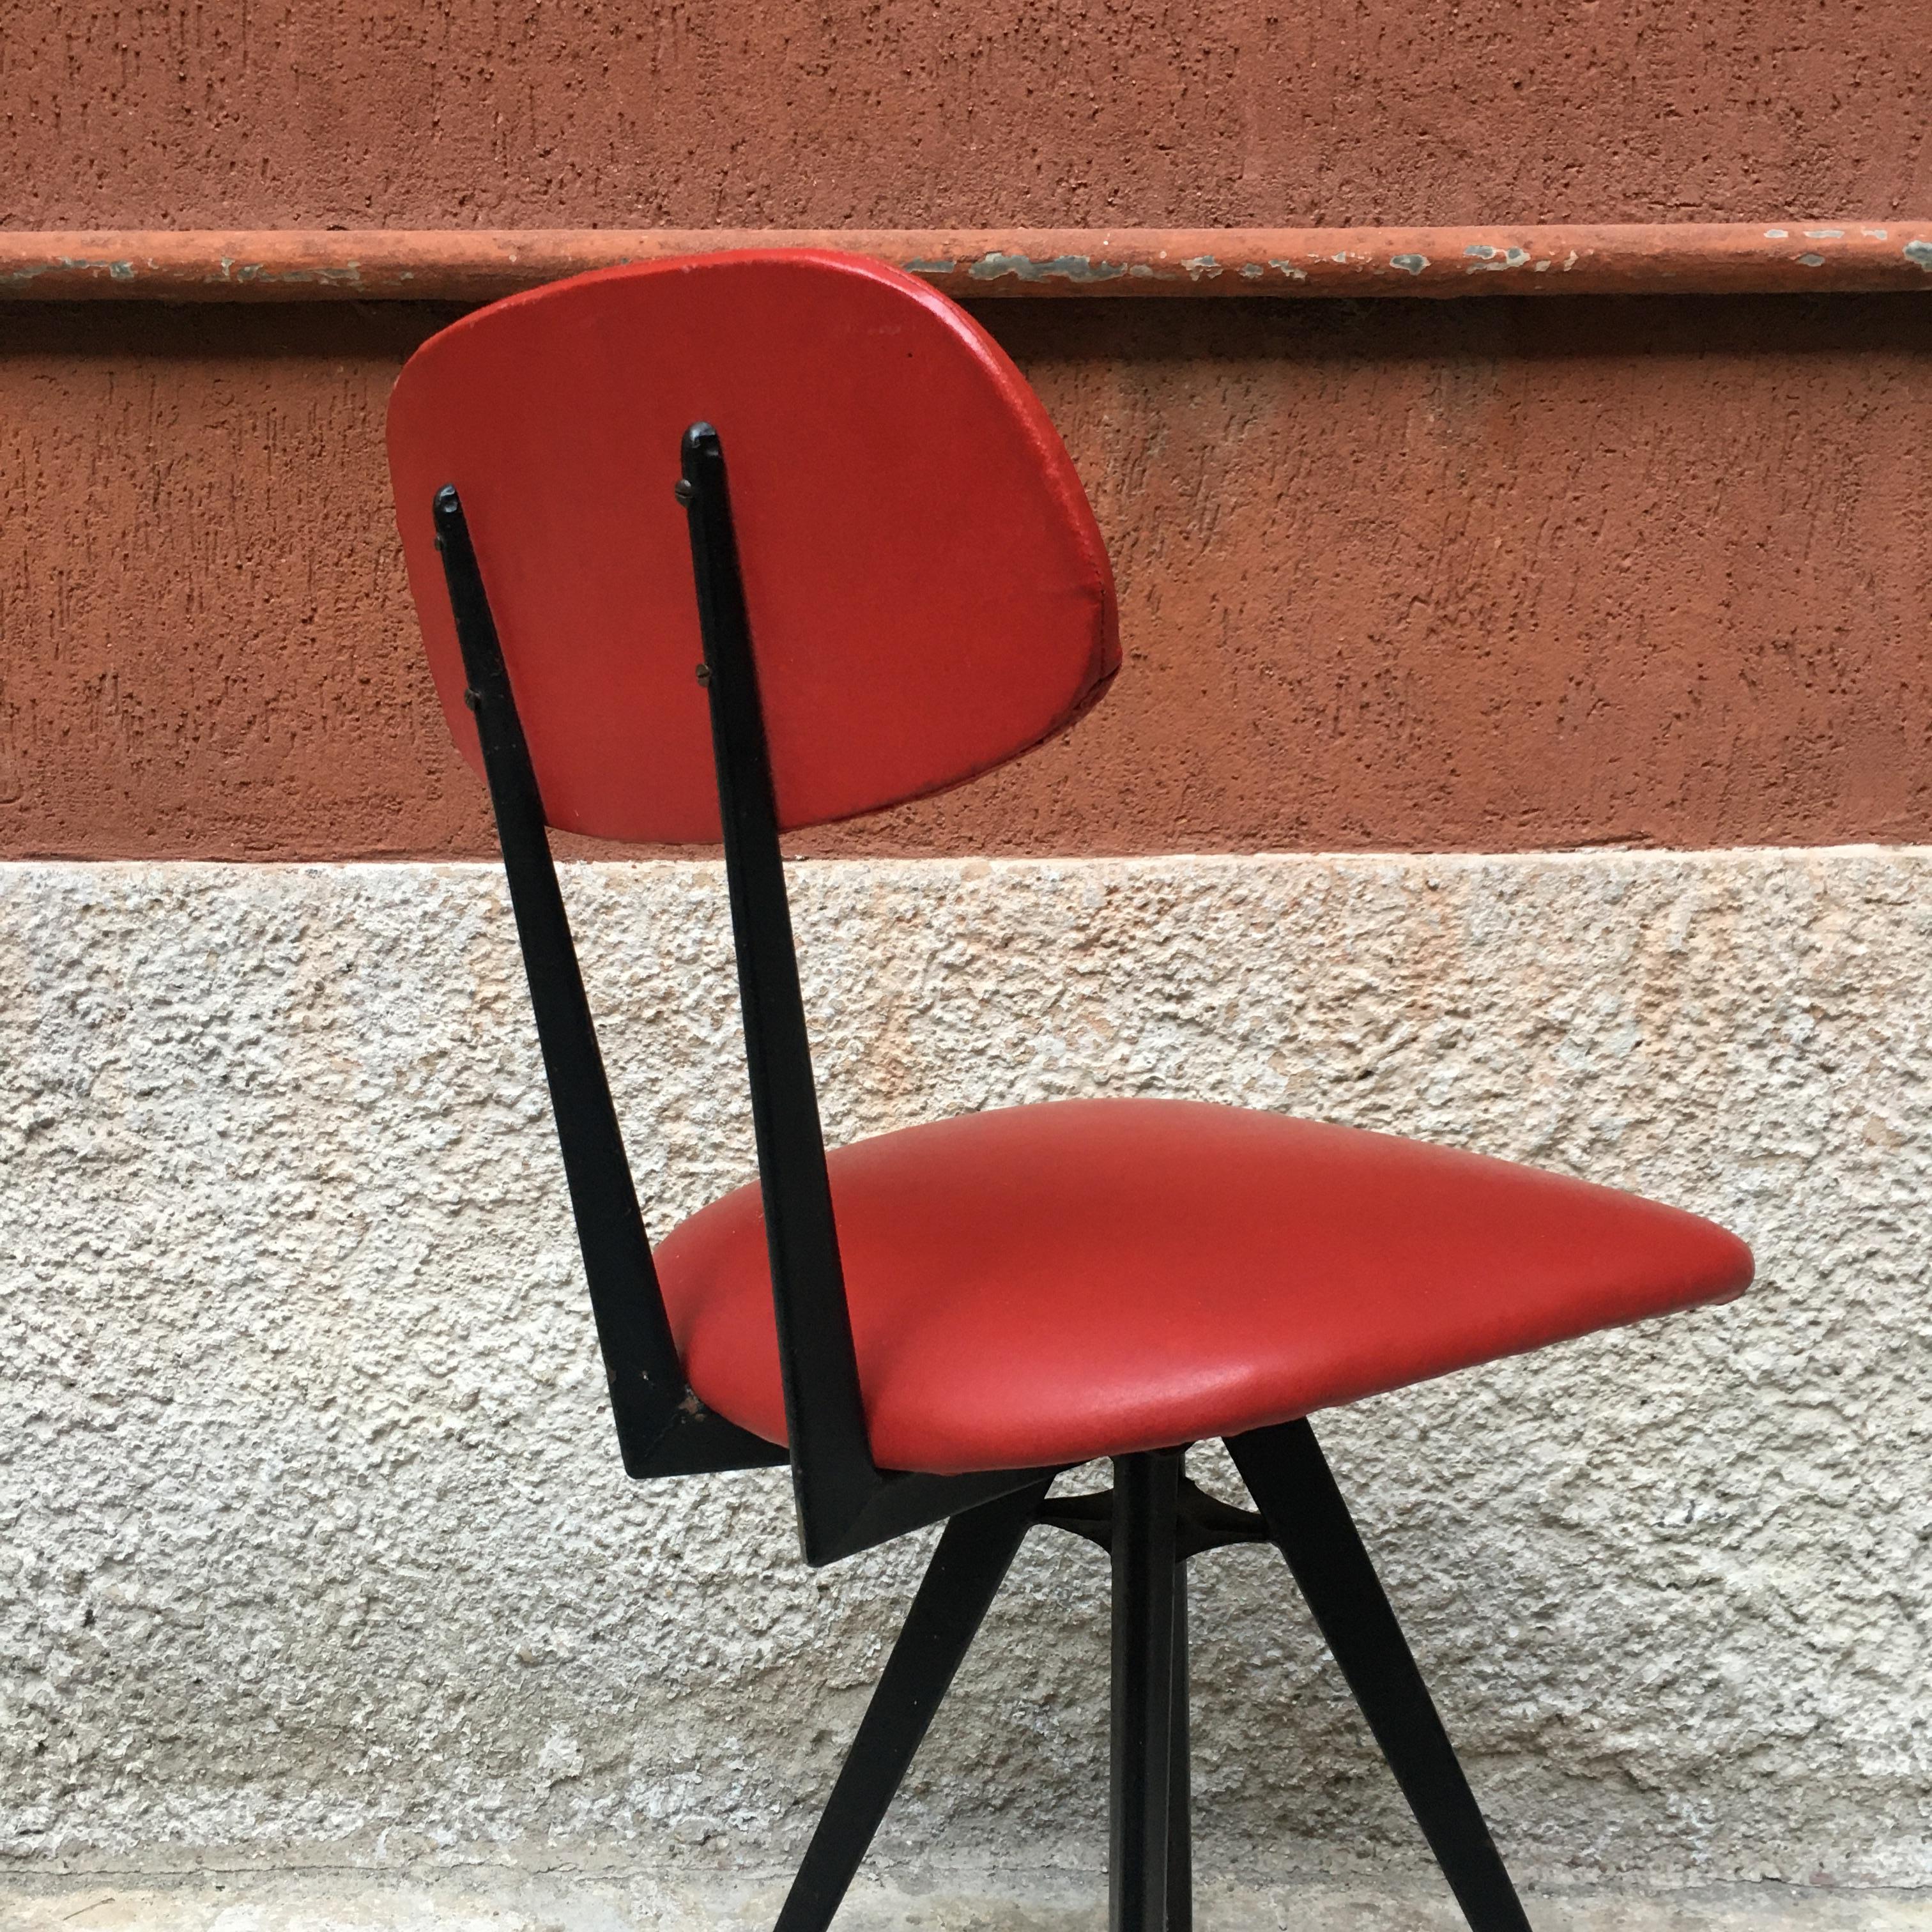 Mid-20th Century Italian Red Leatherette and Metal Legs Chairs, 1960s